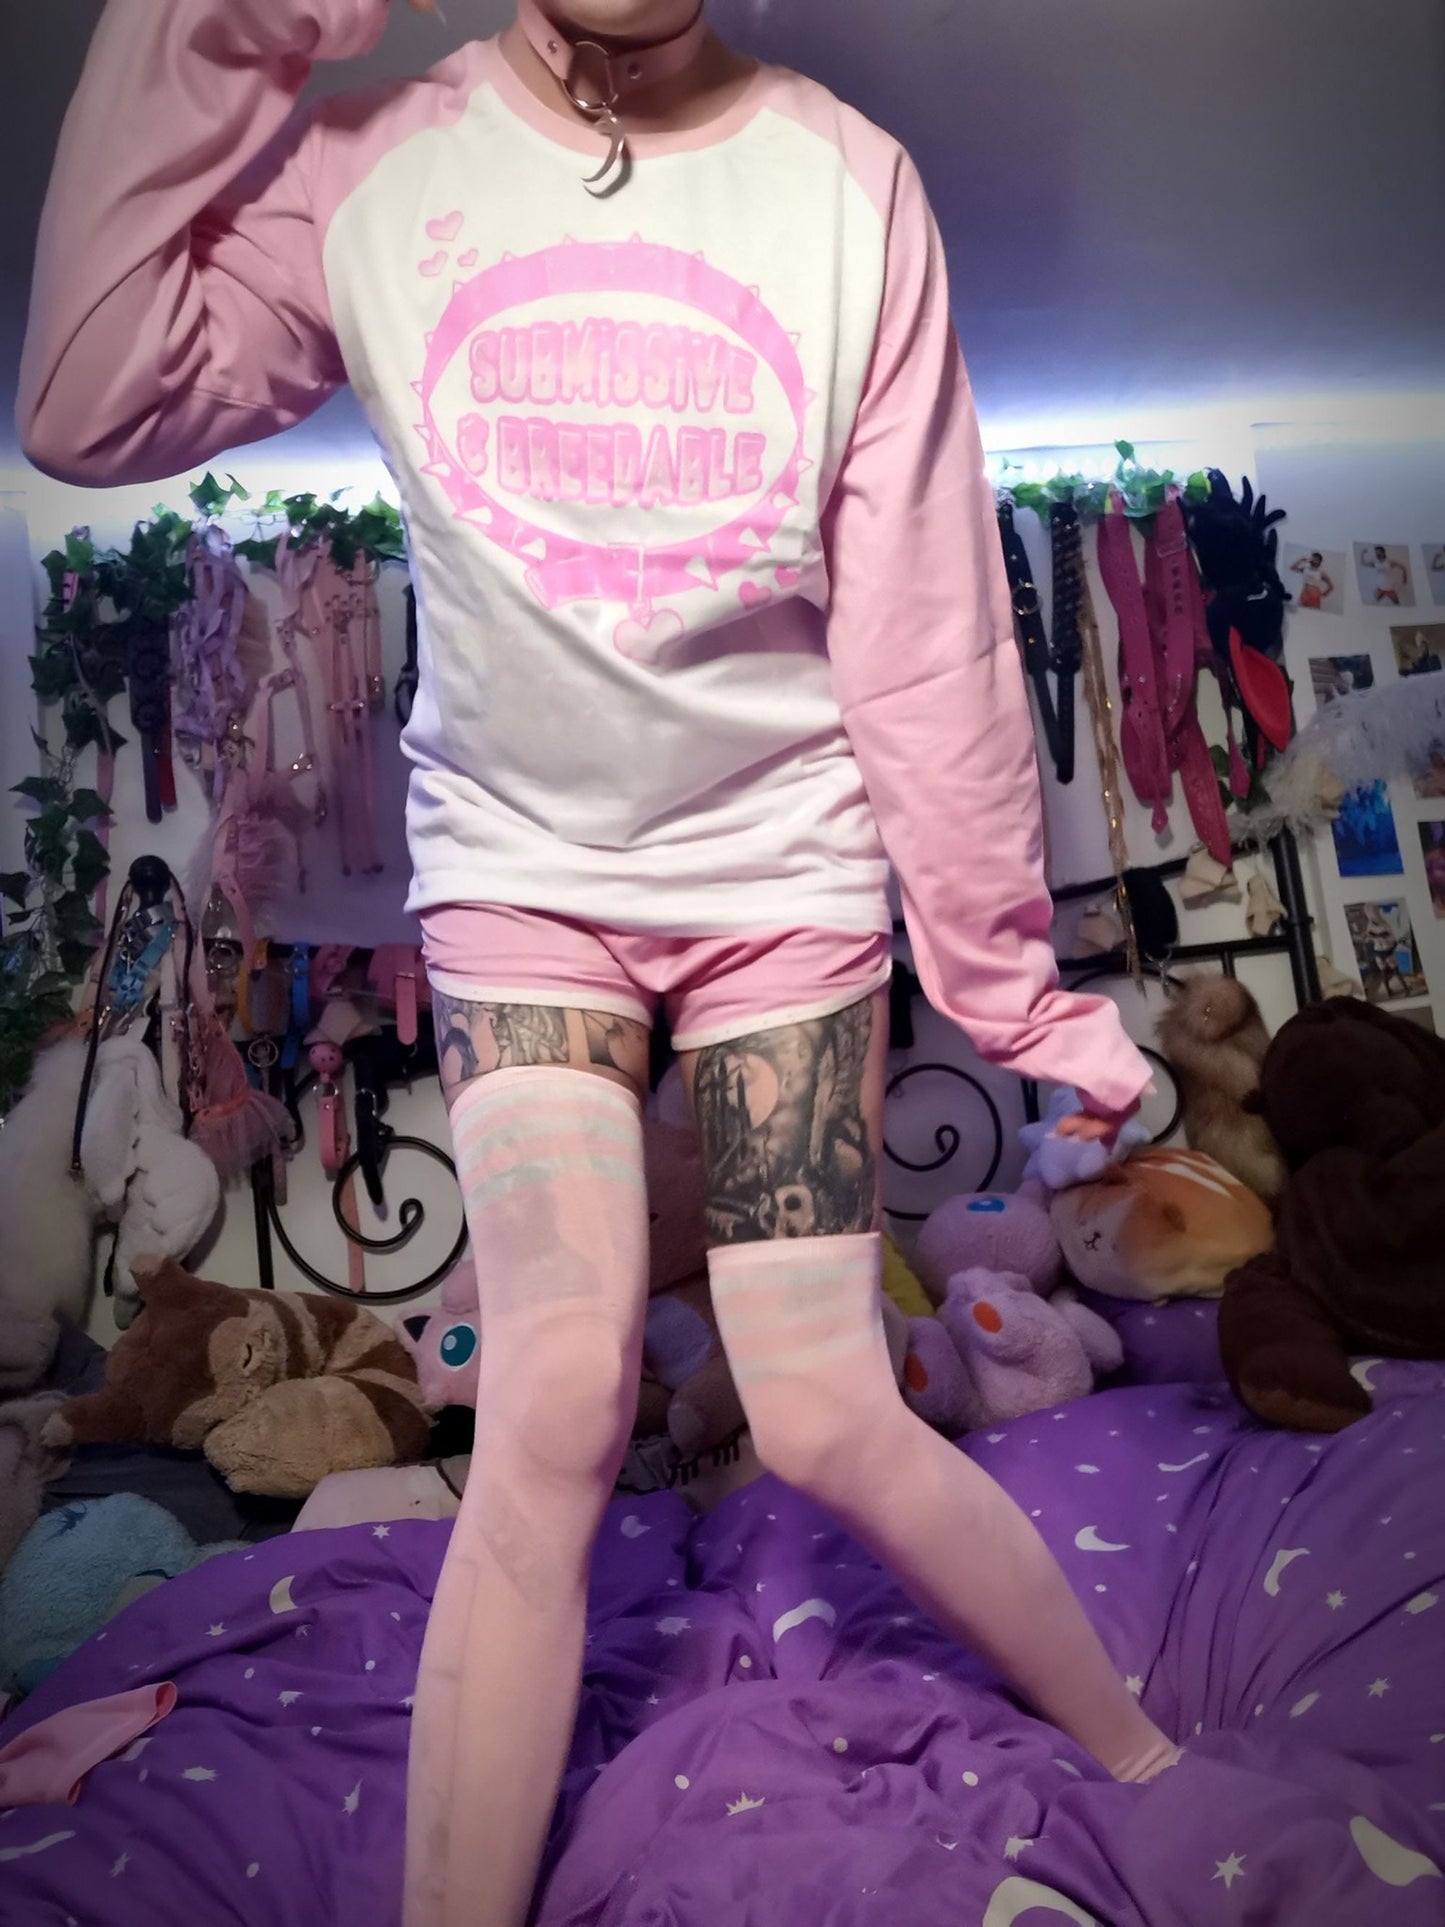 Submissive and Breedable Pink Full Outfit/T-shirt